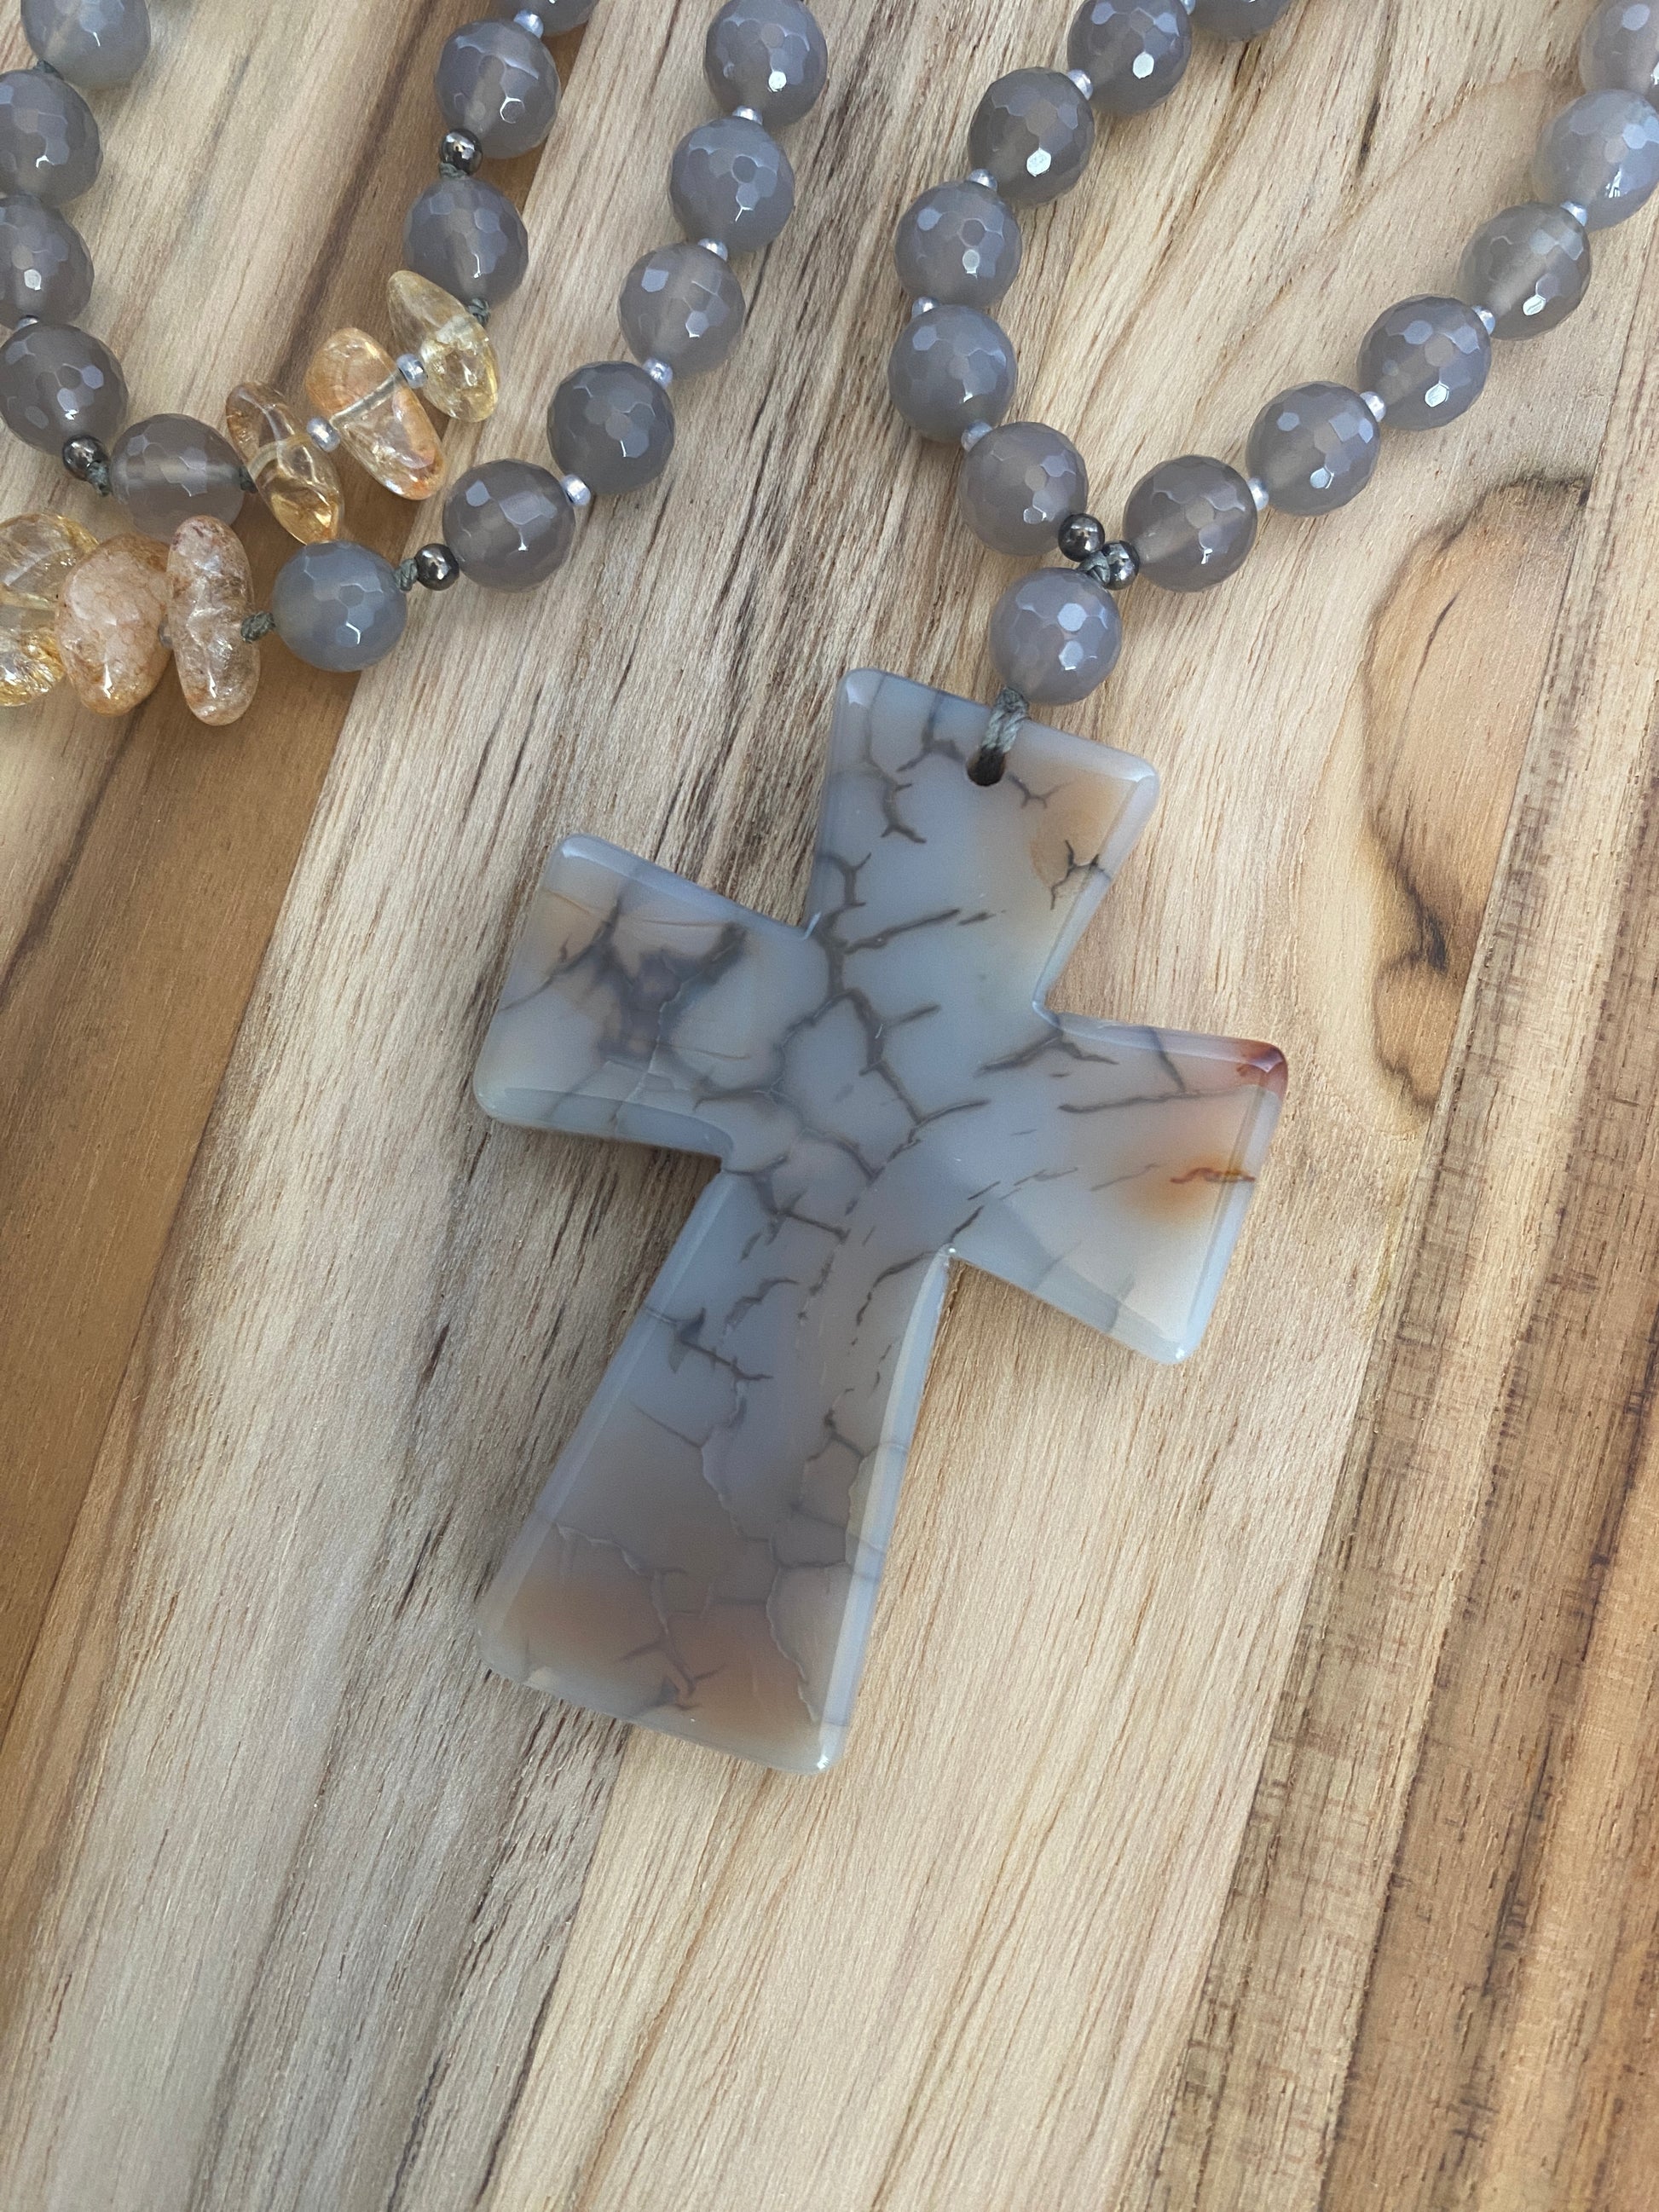 30" Long Grey Dragon Vein Agate Cross Pendant Necklace with Agate & Citrine Beads - My Urban Gems